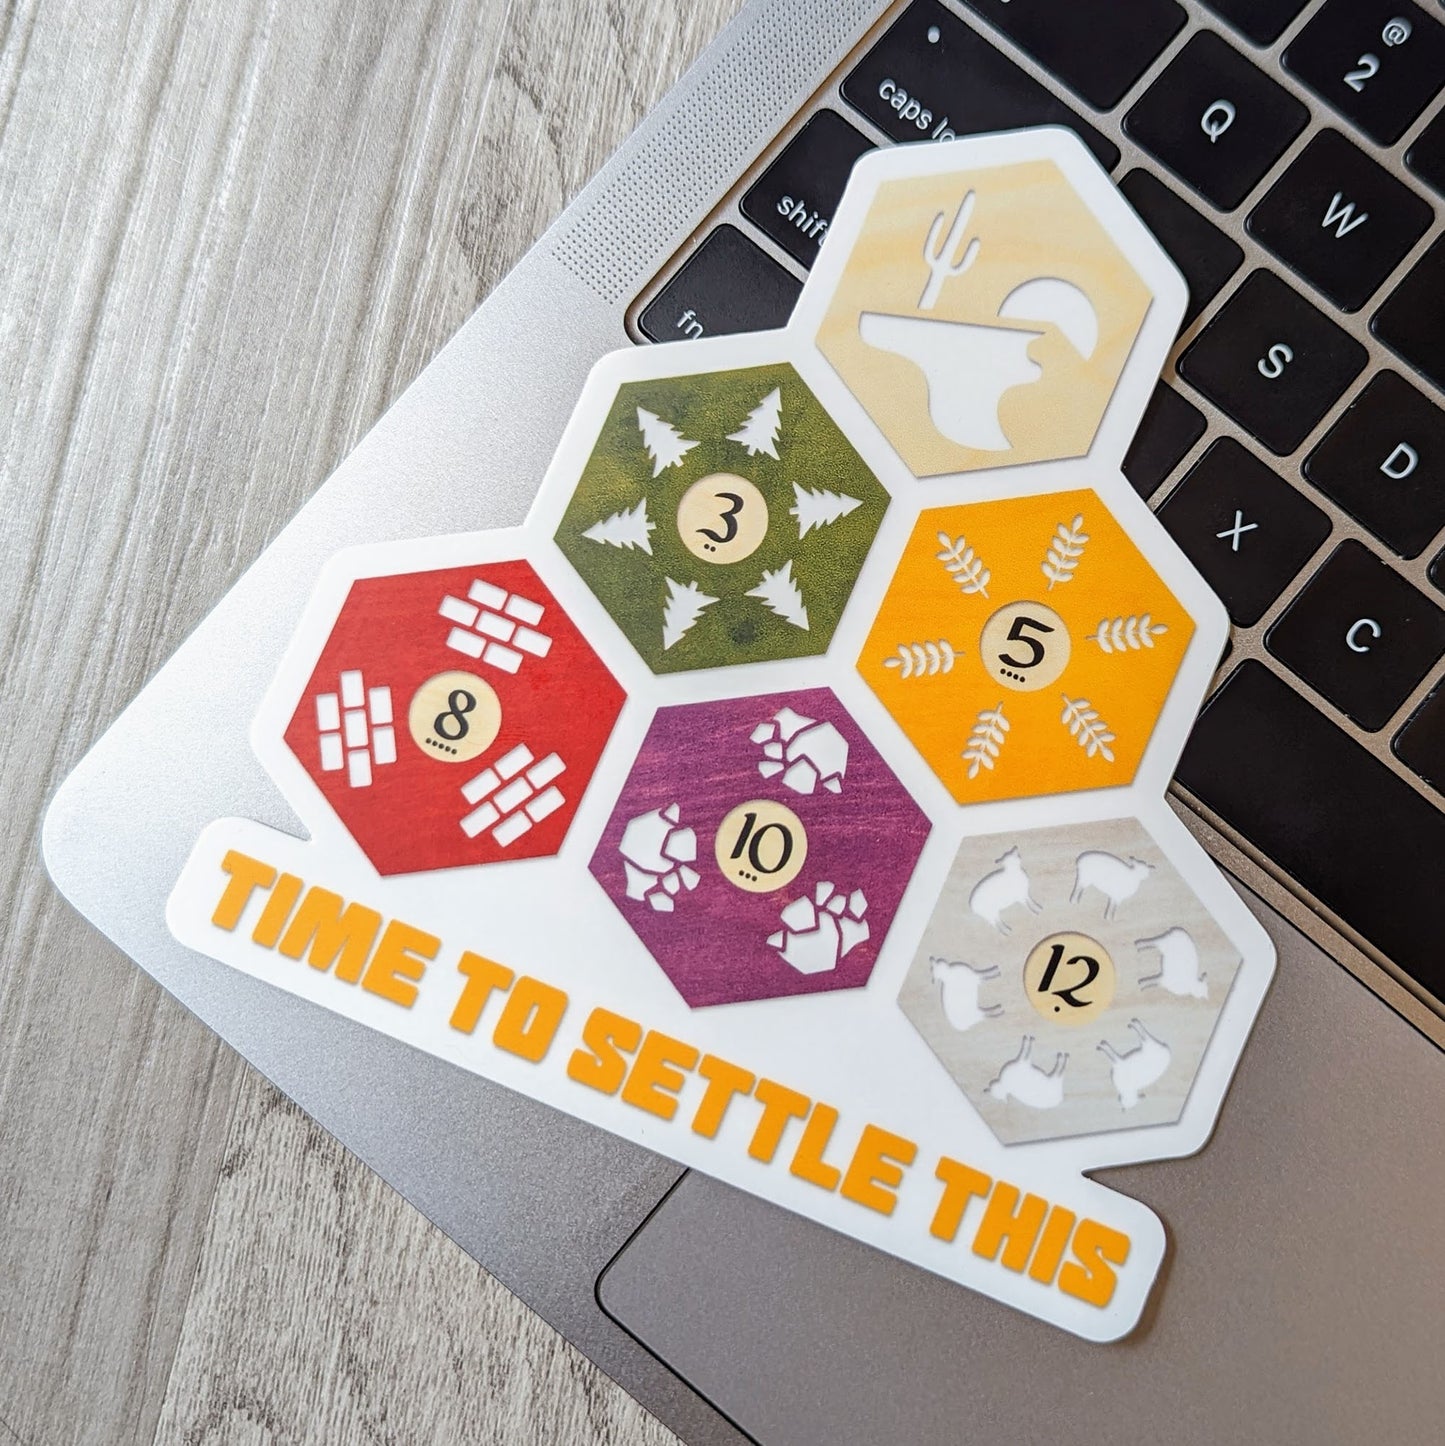 settlers of catan time to settle this large 5 inch vinyl sticker